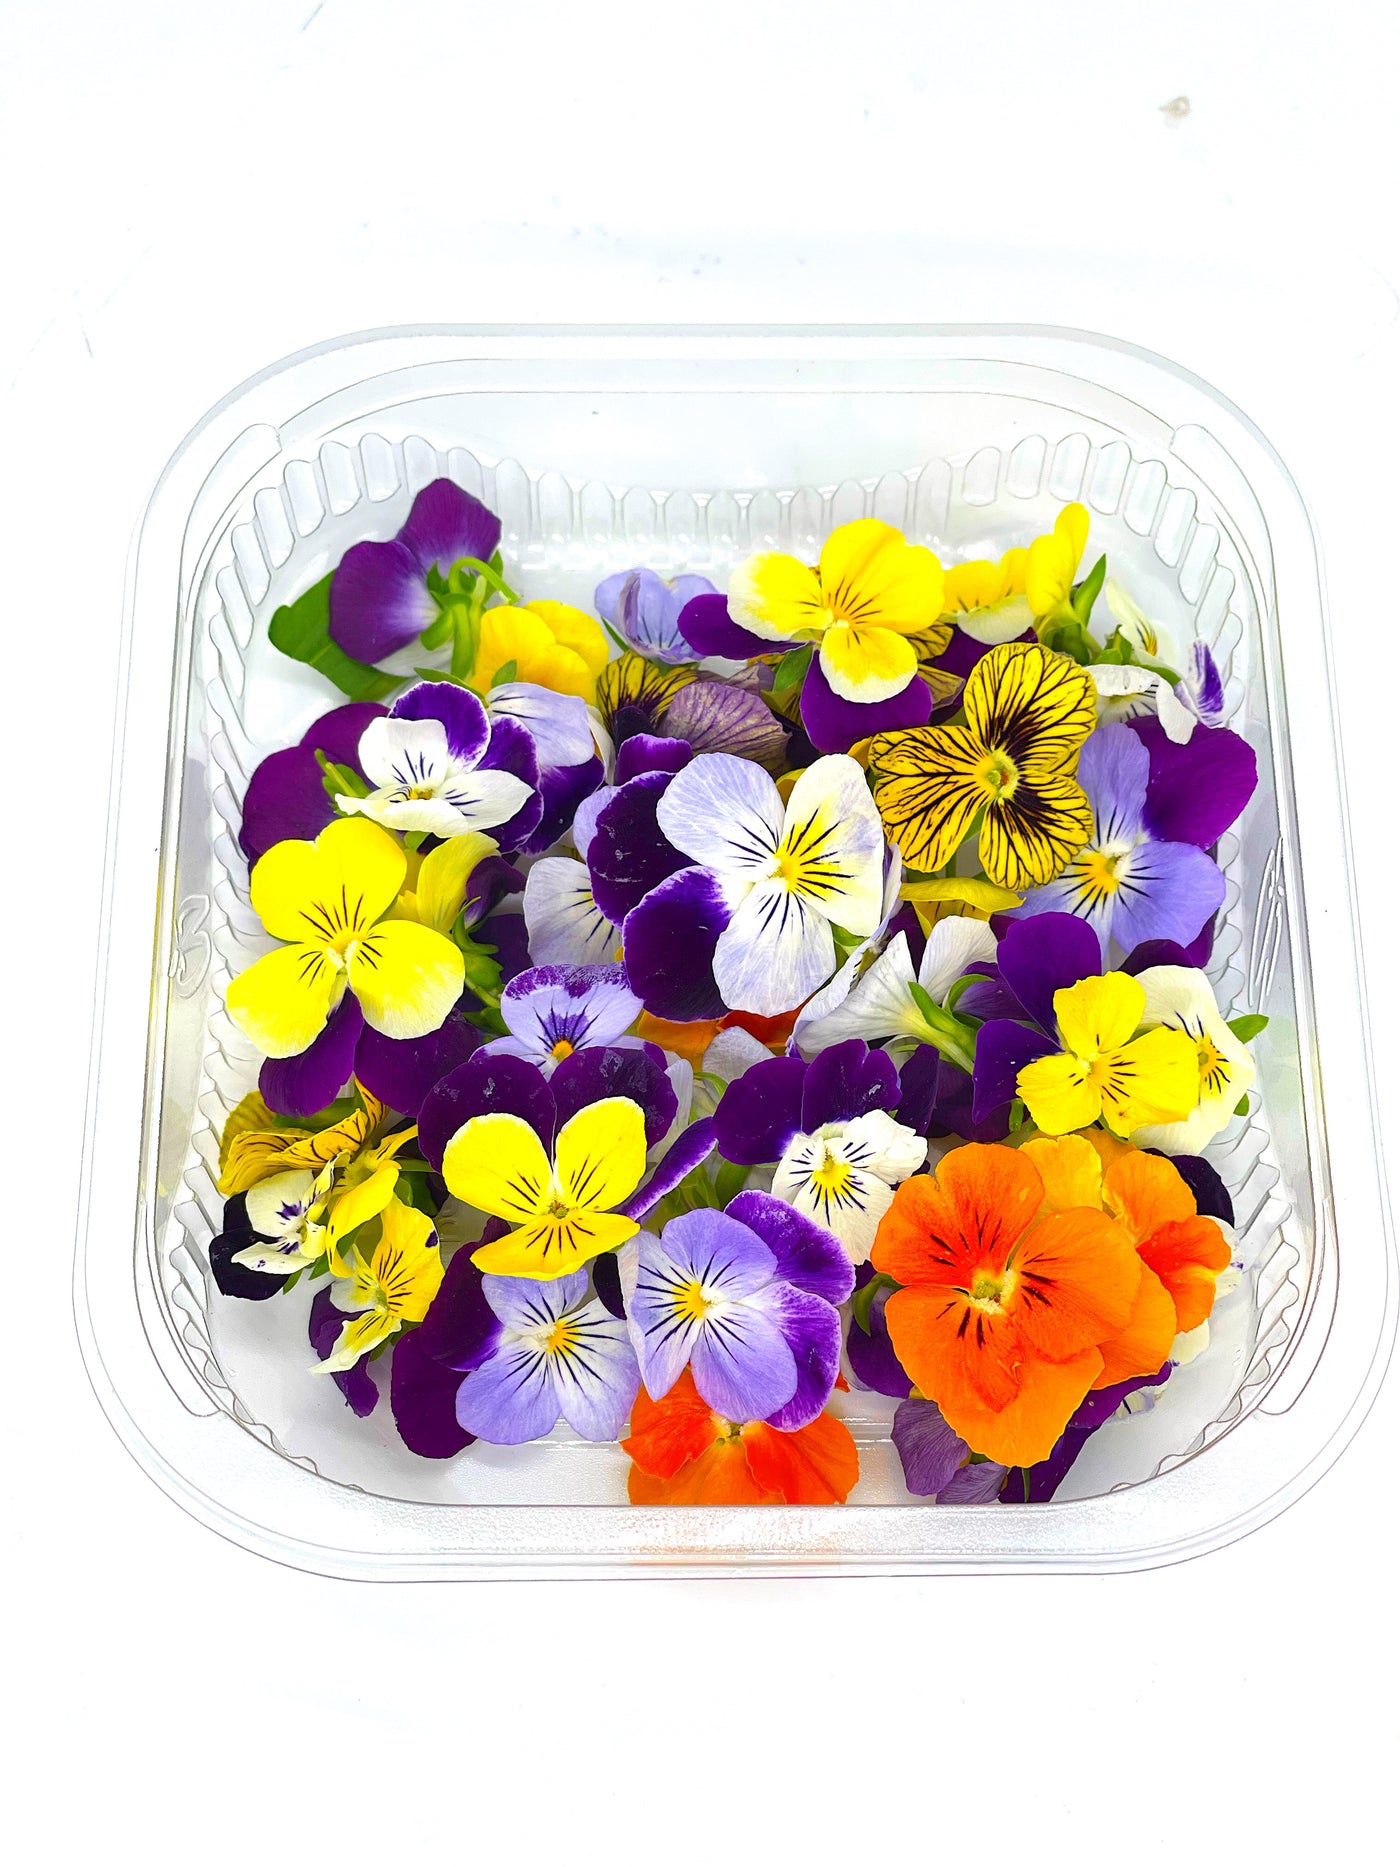 20 Edible Flowers You Can Grow in Your Garden